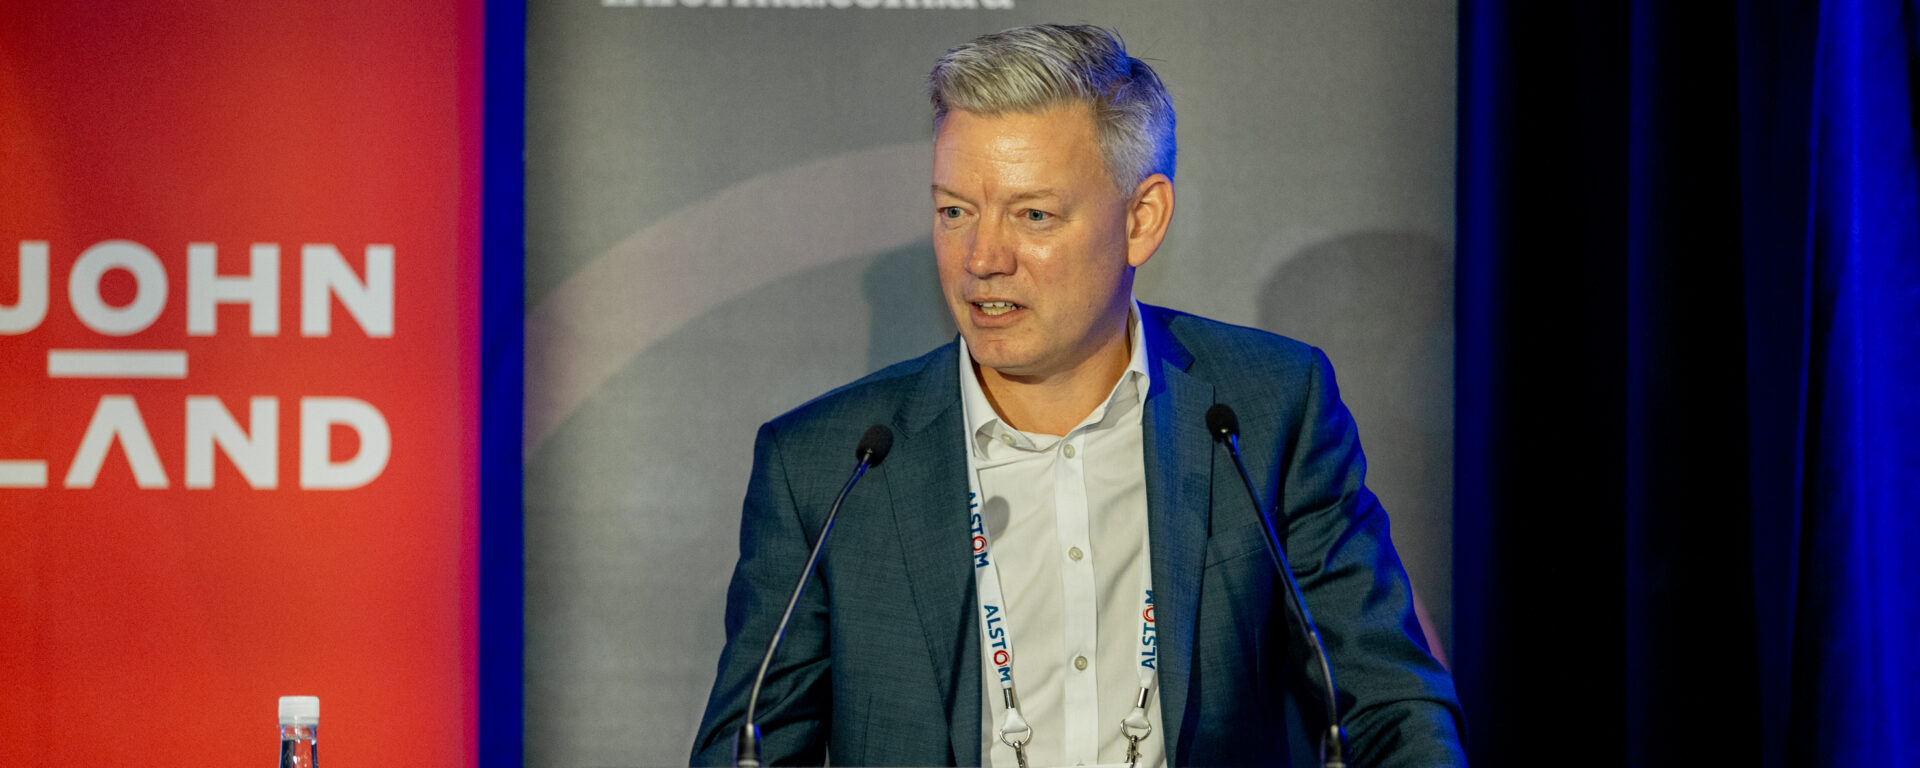 Peter Lensink featured at New Zealand Rail Conference